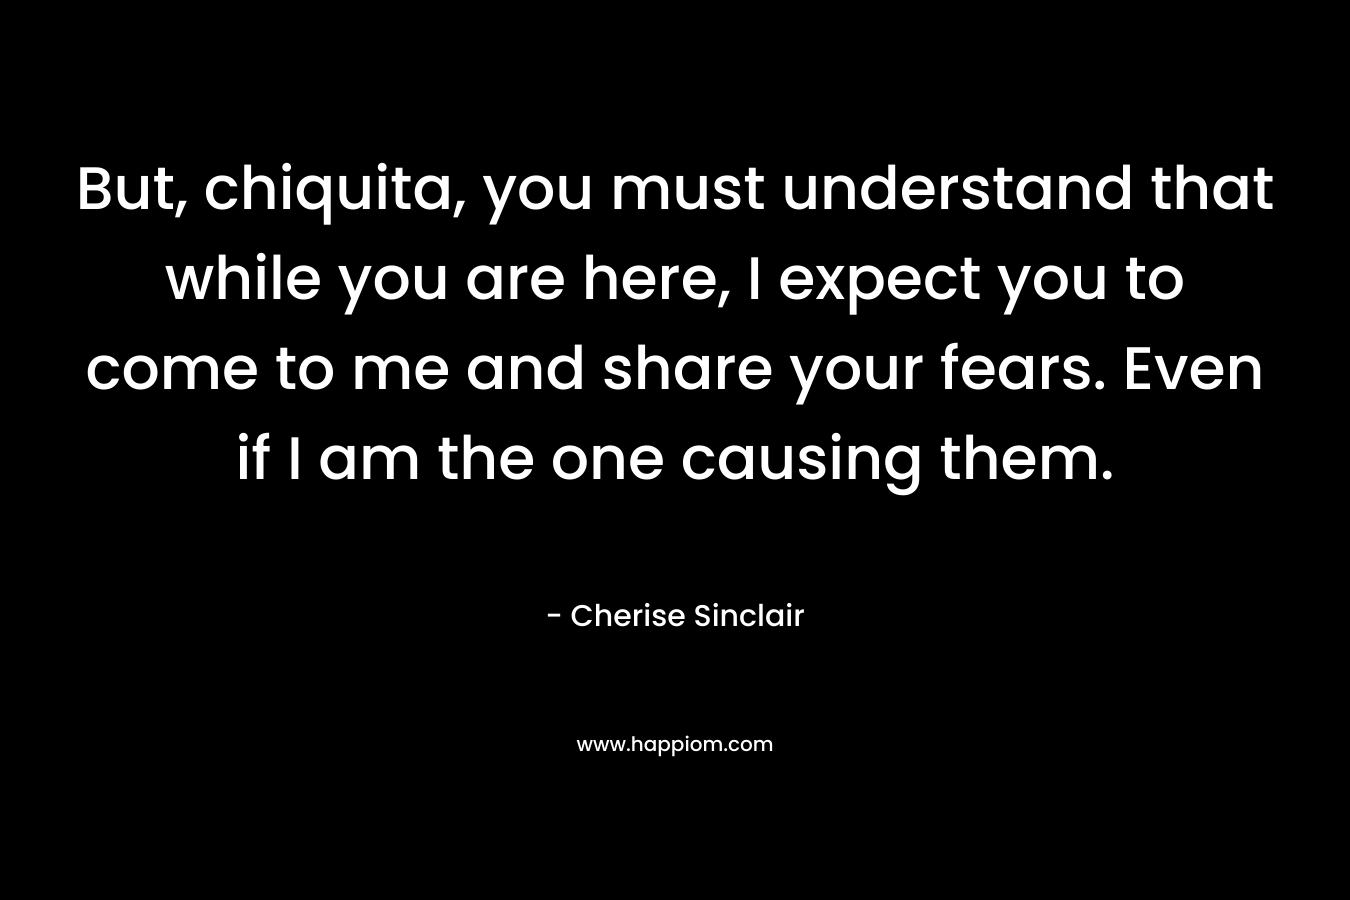 But, chiquita, you must understand that while you are here, I expect you to come to me and share your fears. Even if I am the one causing them.